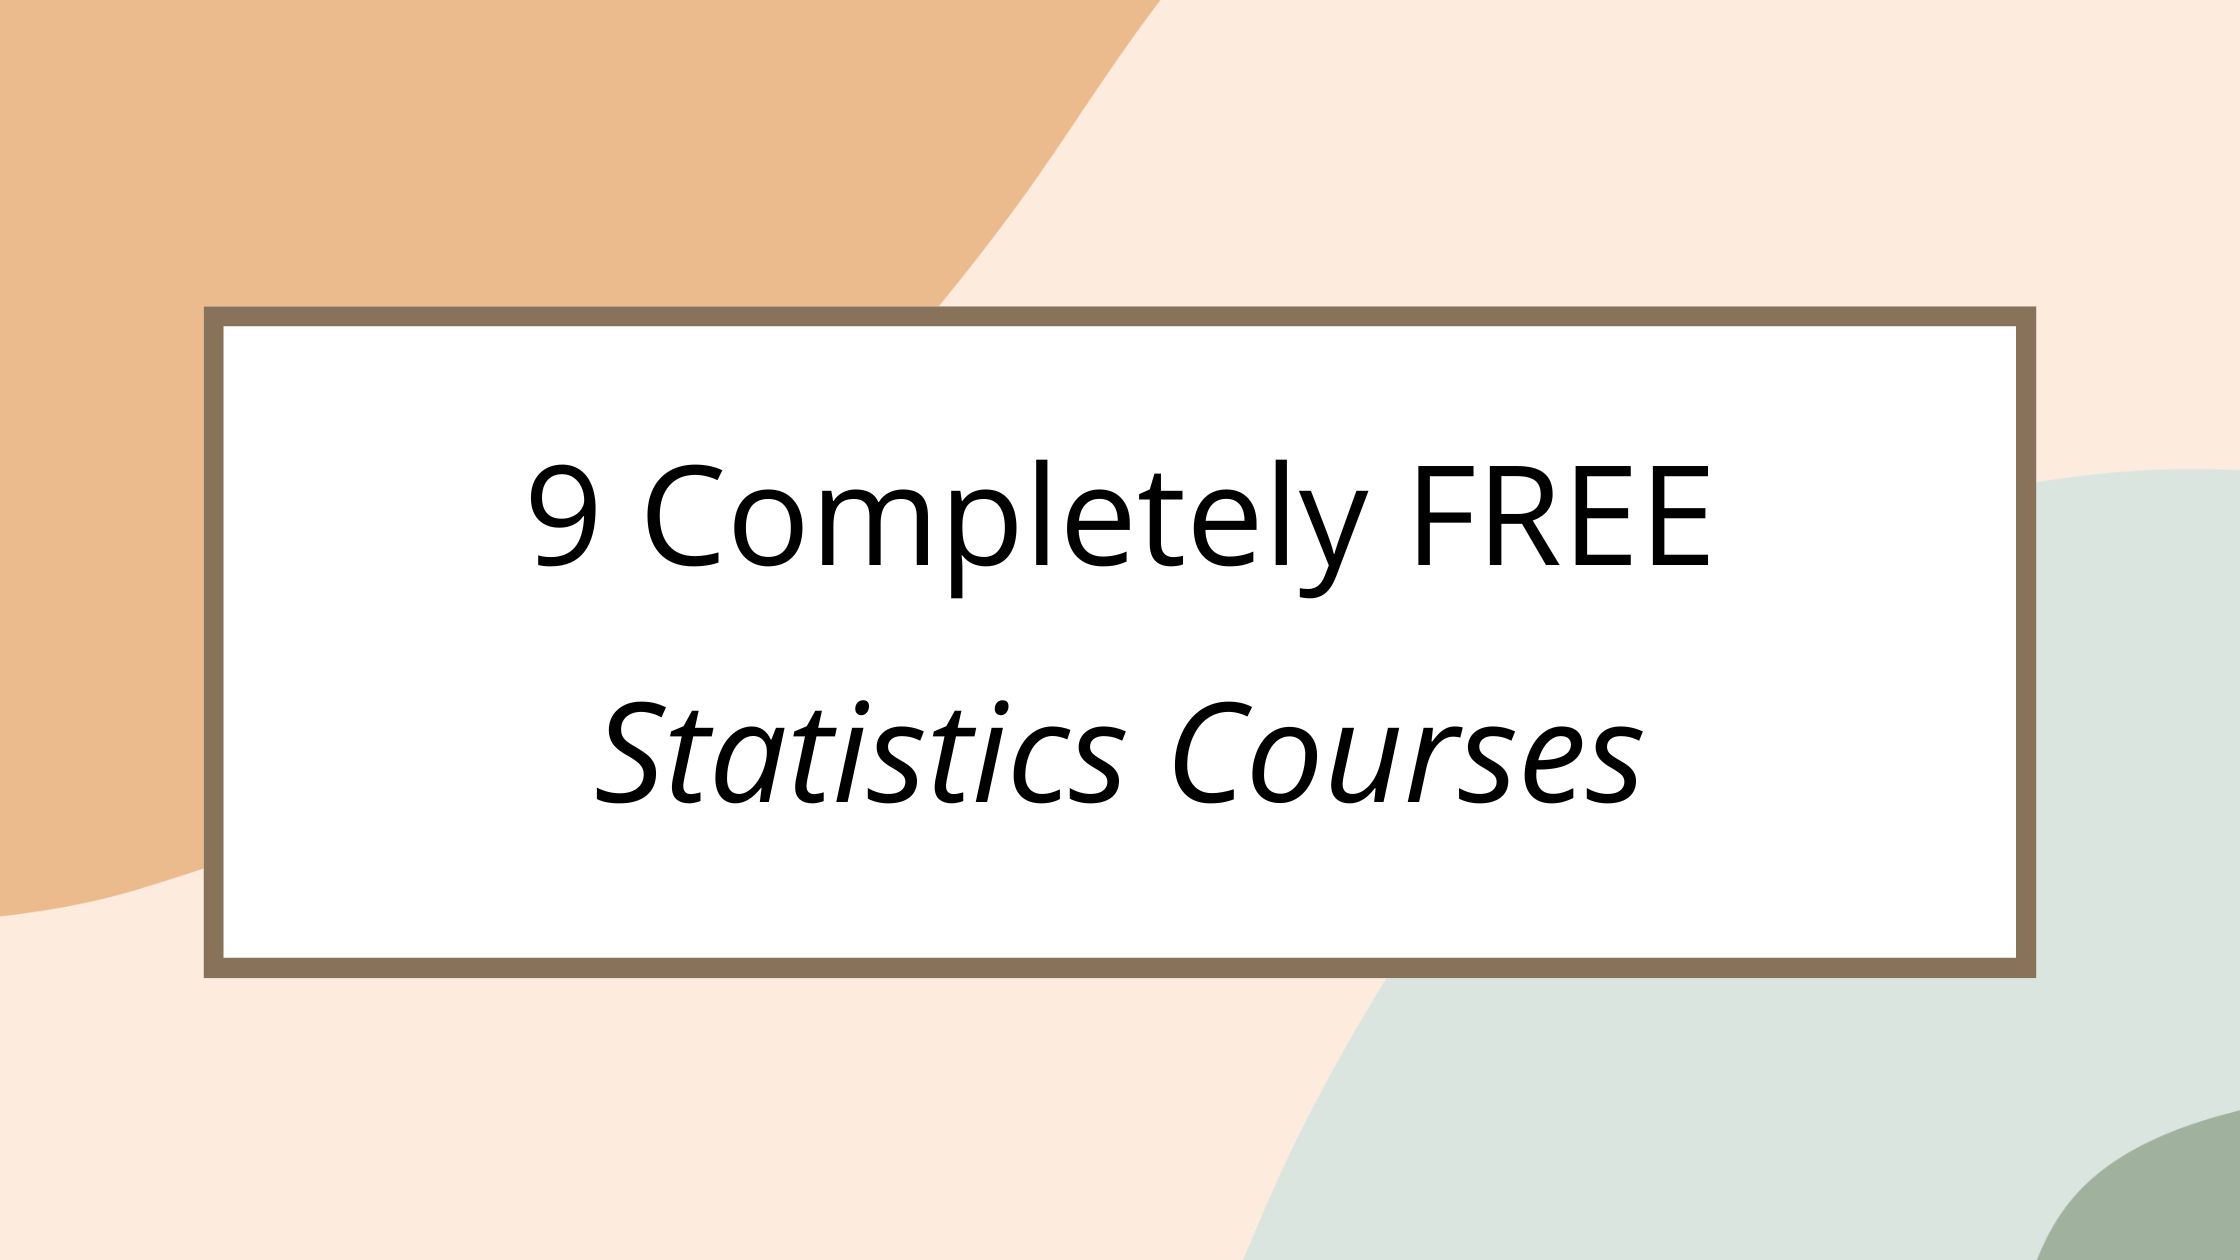 How to Enroll in WHO Free Online Courses?